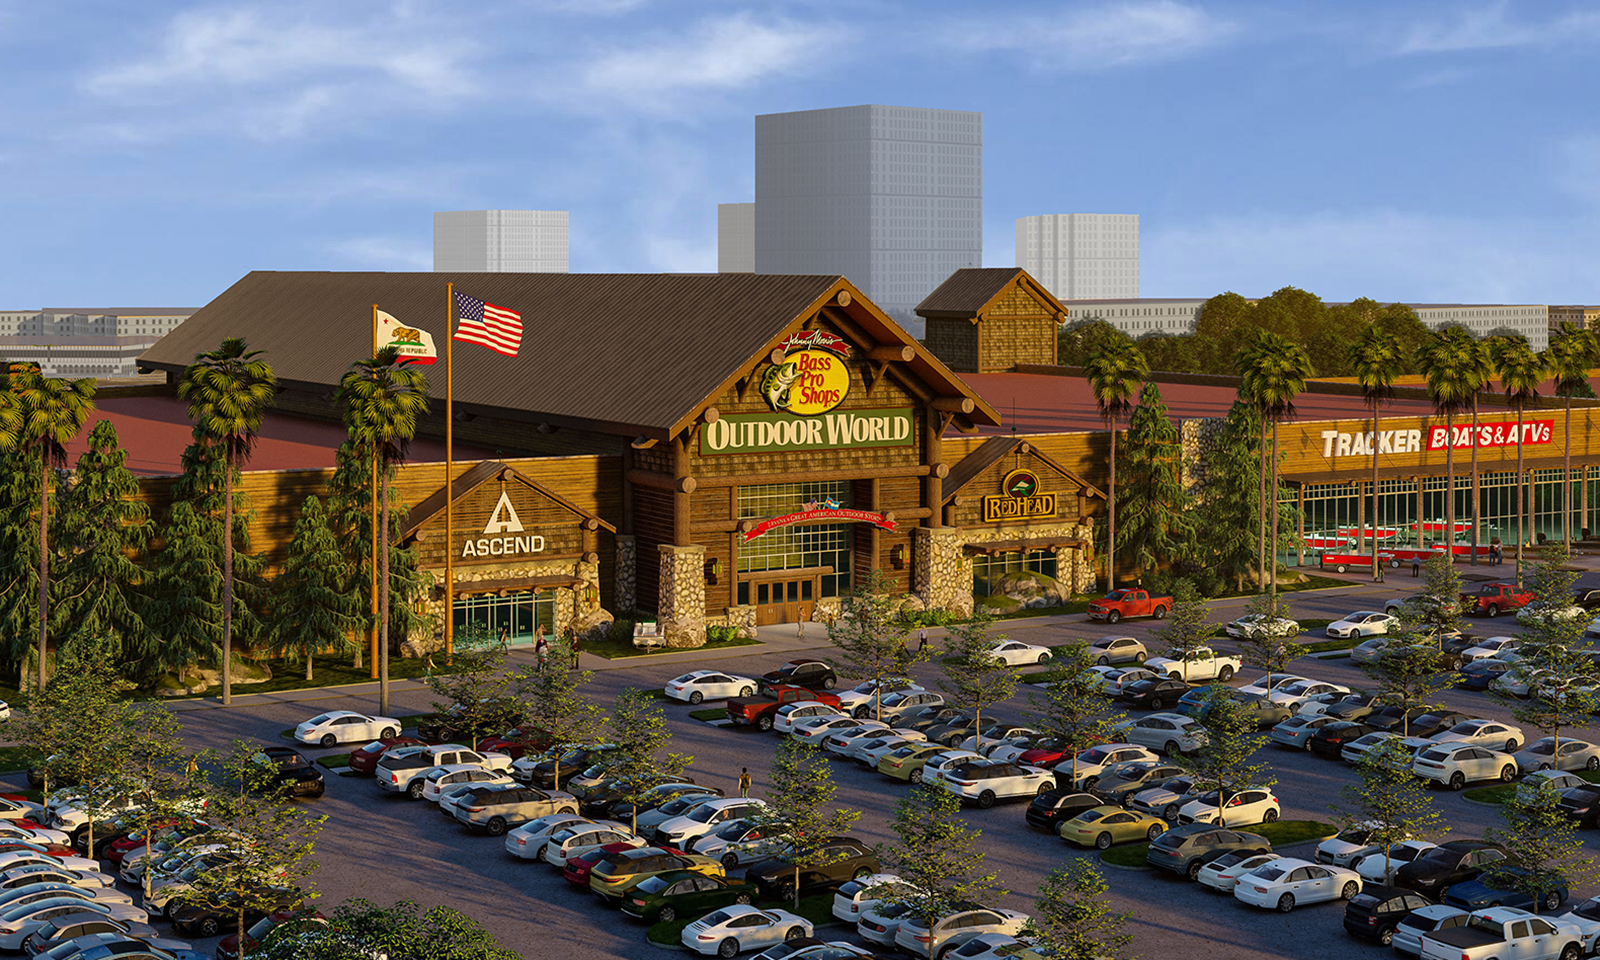 Bass Pro Shops coming to town